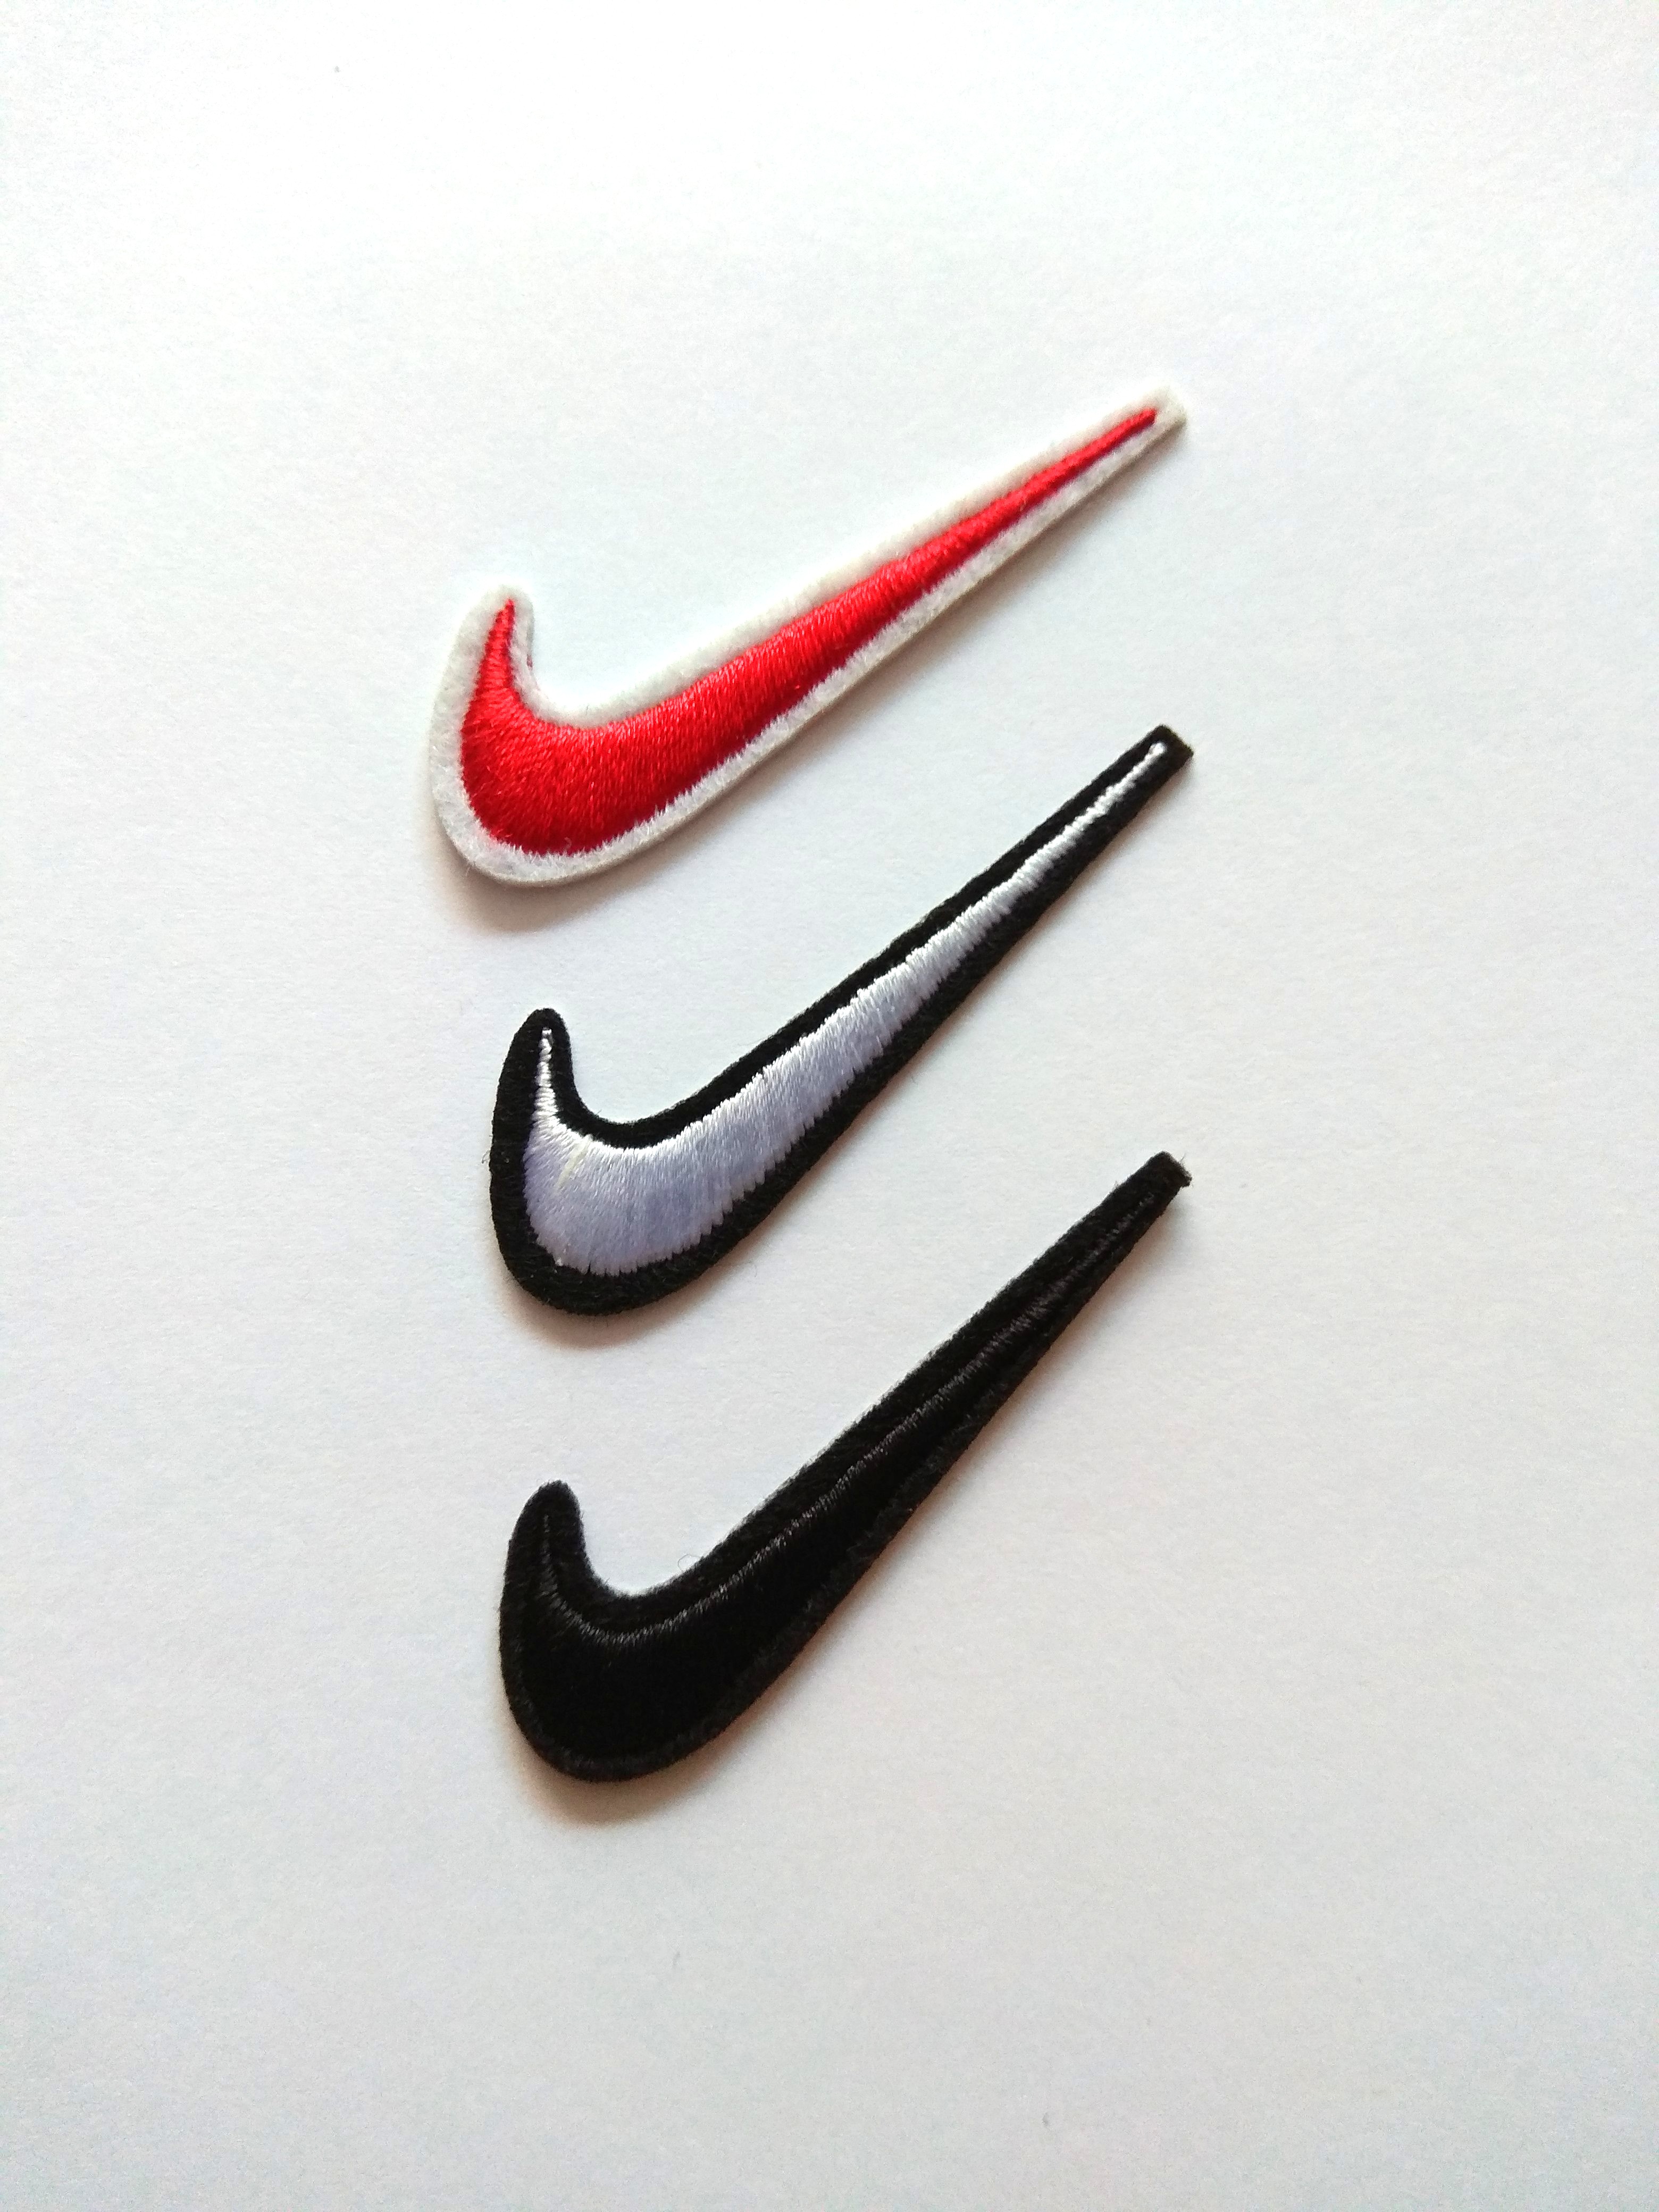 nike swoosh account restrictions